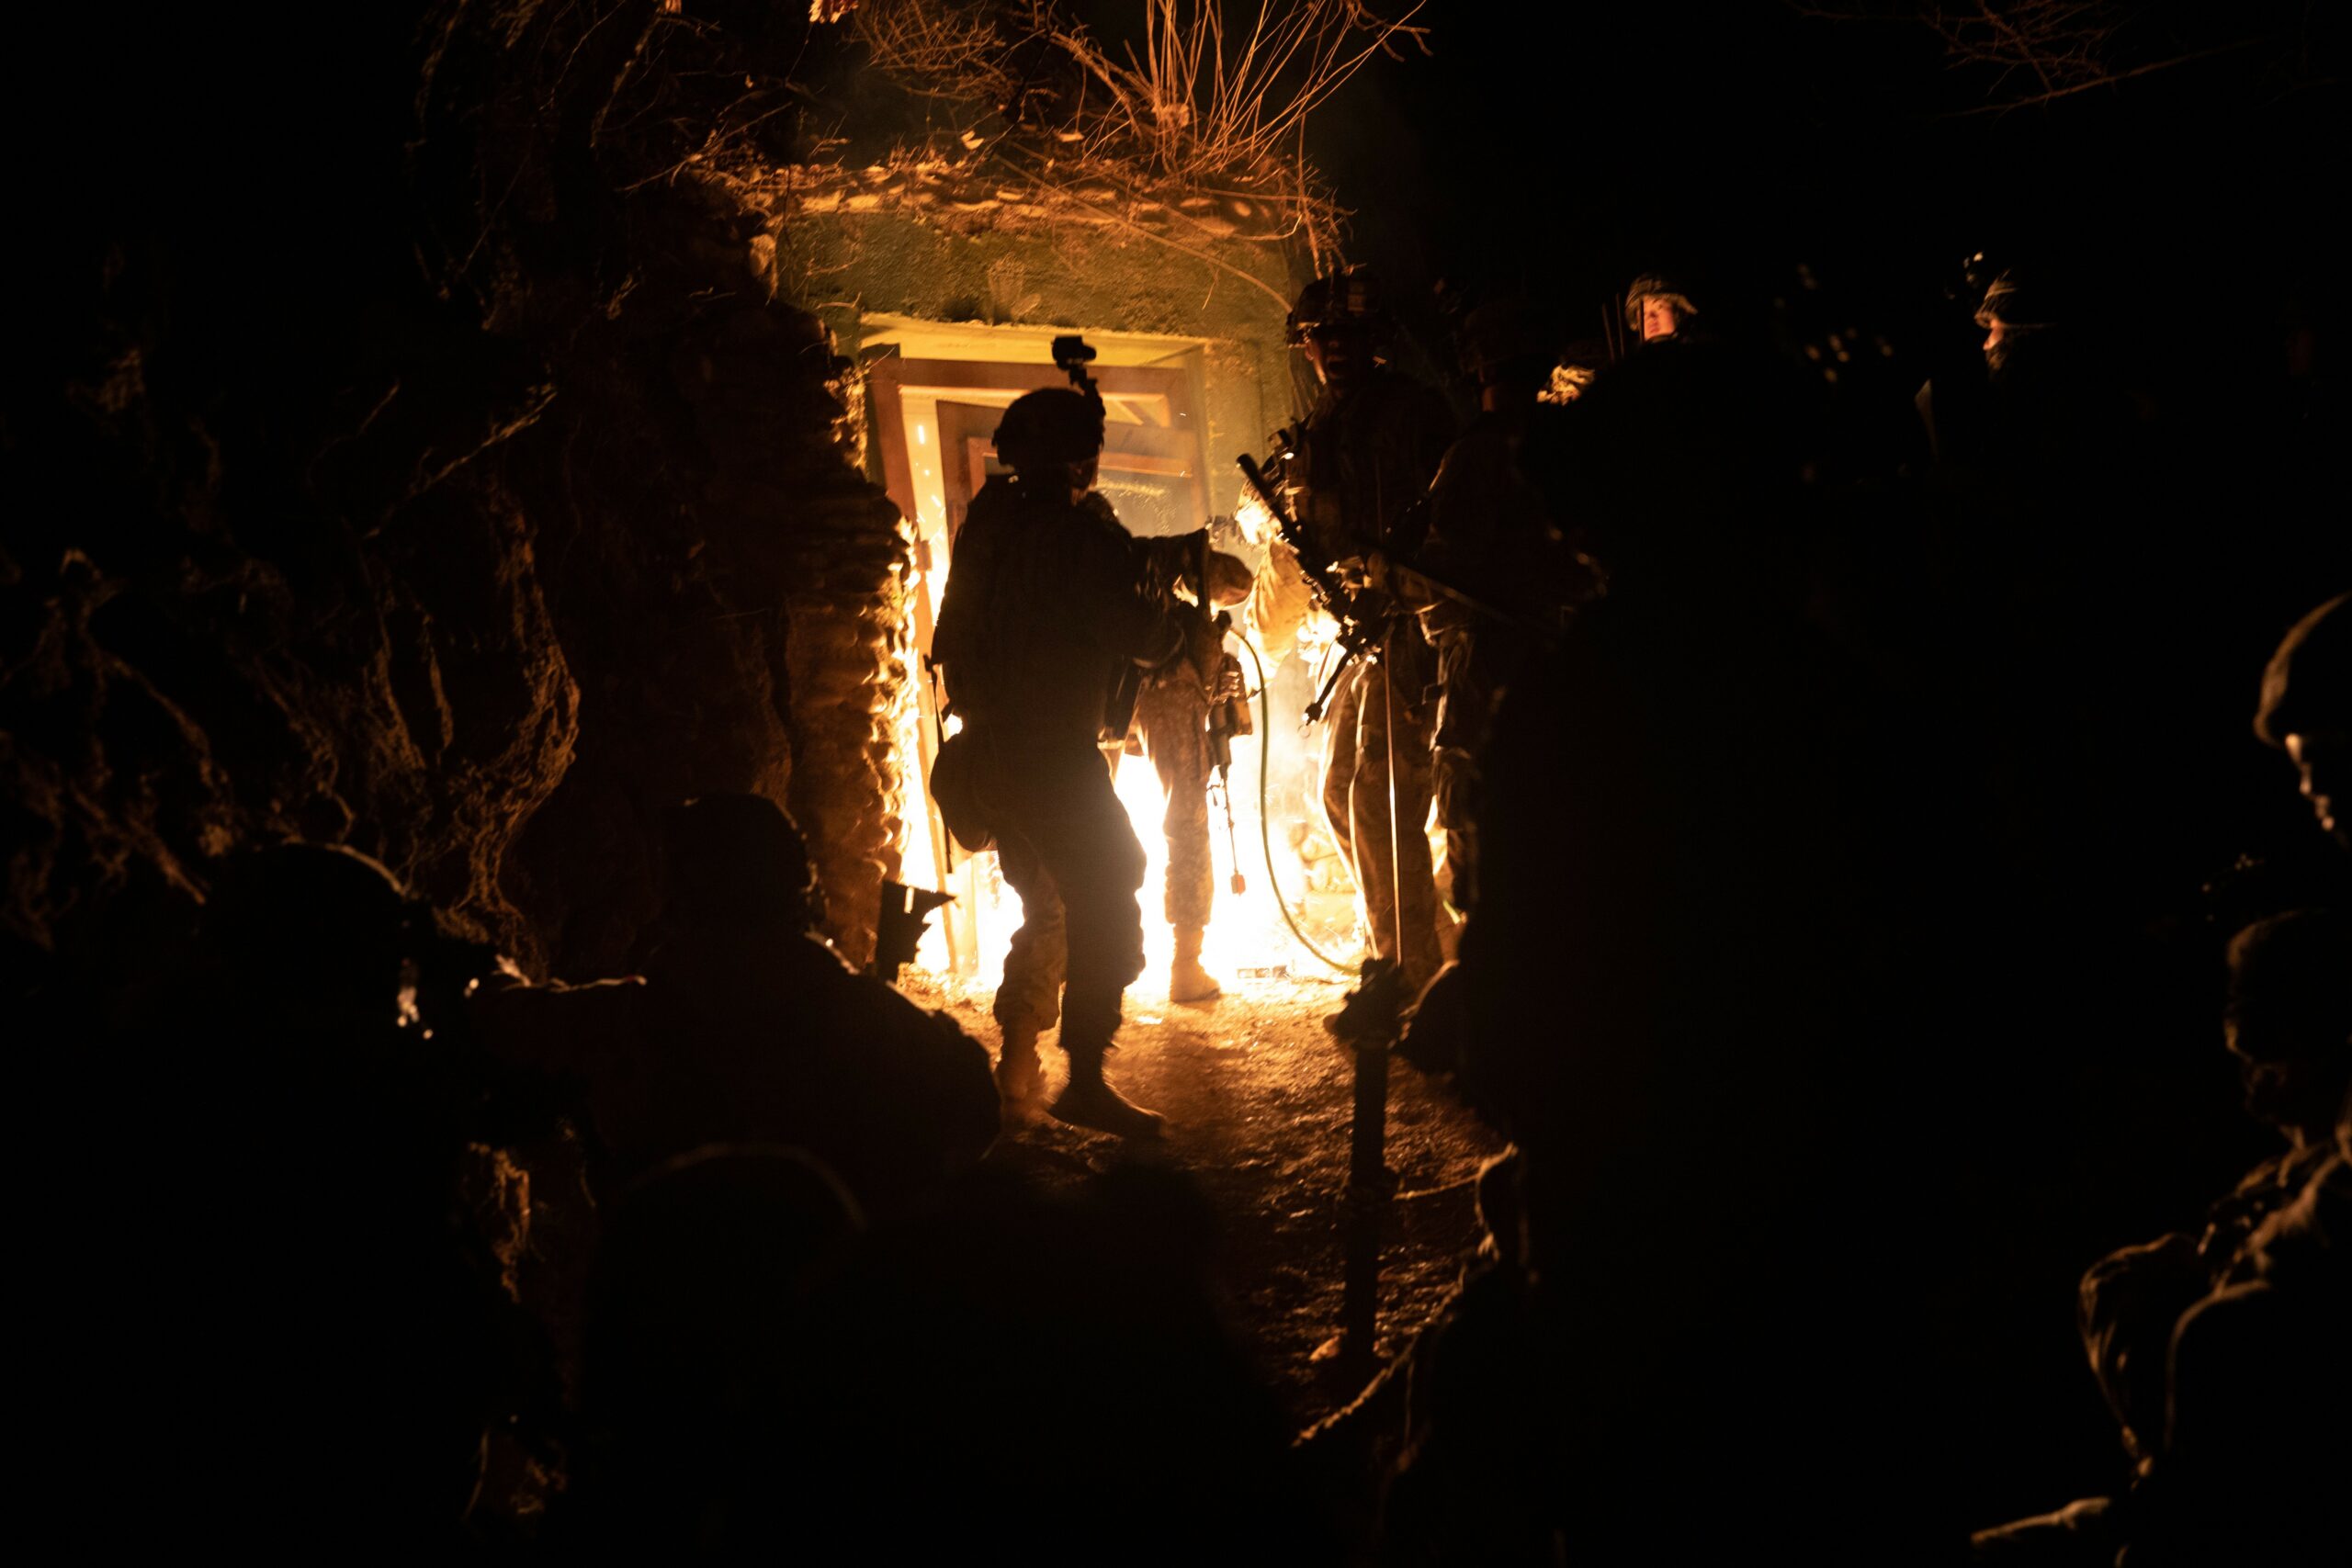 A Soldier with 2nd Brigade, 2nd Infantry Division breaches the entrance of an underground complex during the early morning on March 16, 2023 at Goldmine Training Area, Republic of Korea during Exercise Warrior Shield. (Sgt. Joshua DuRant)